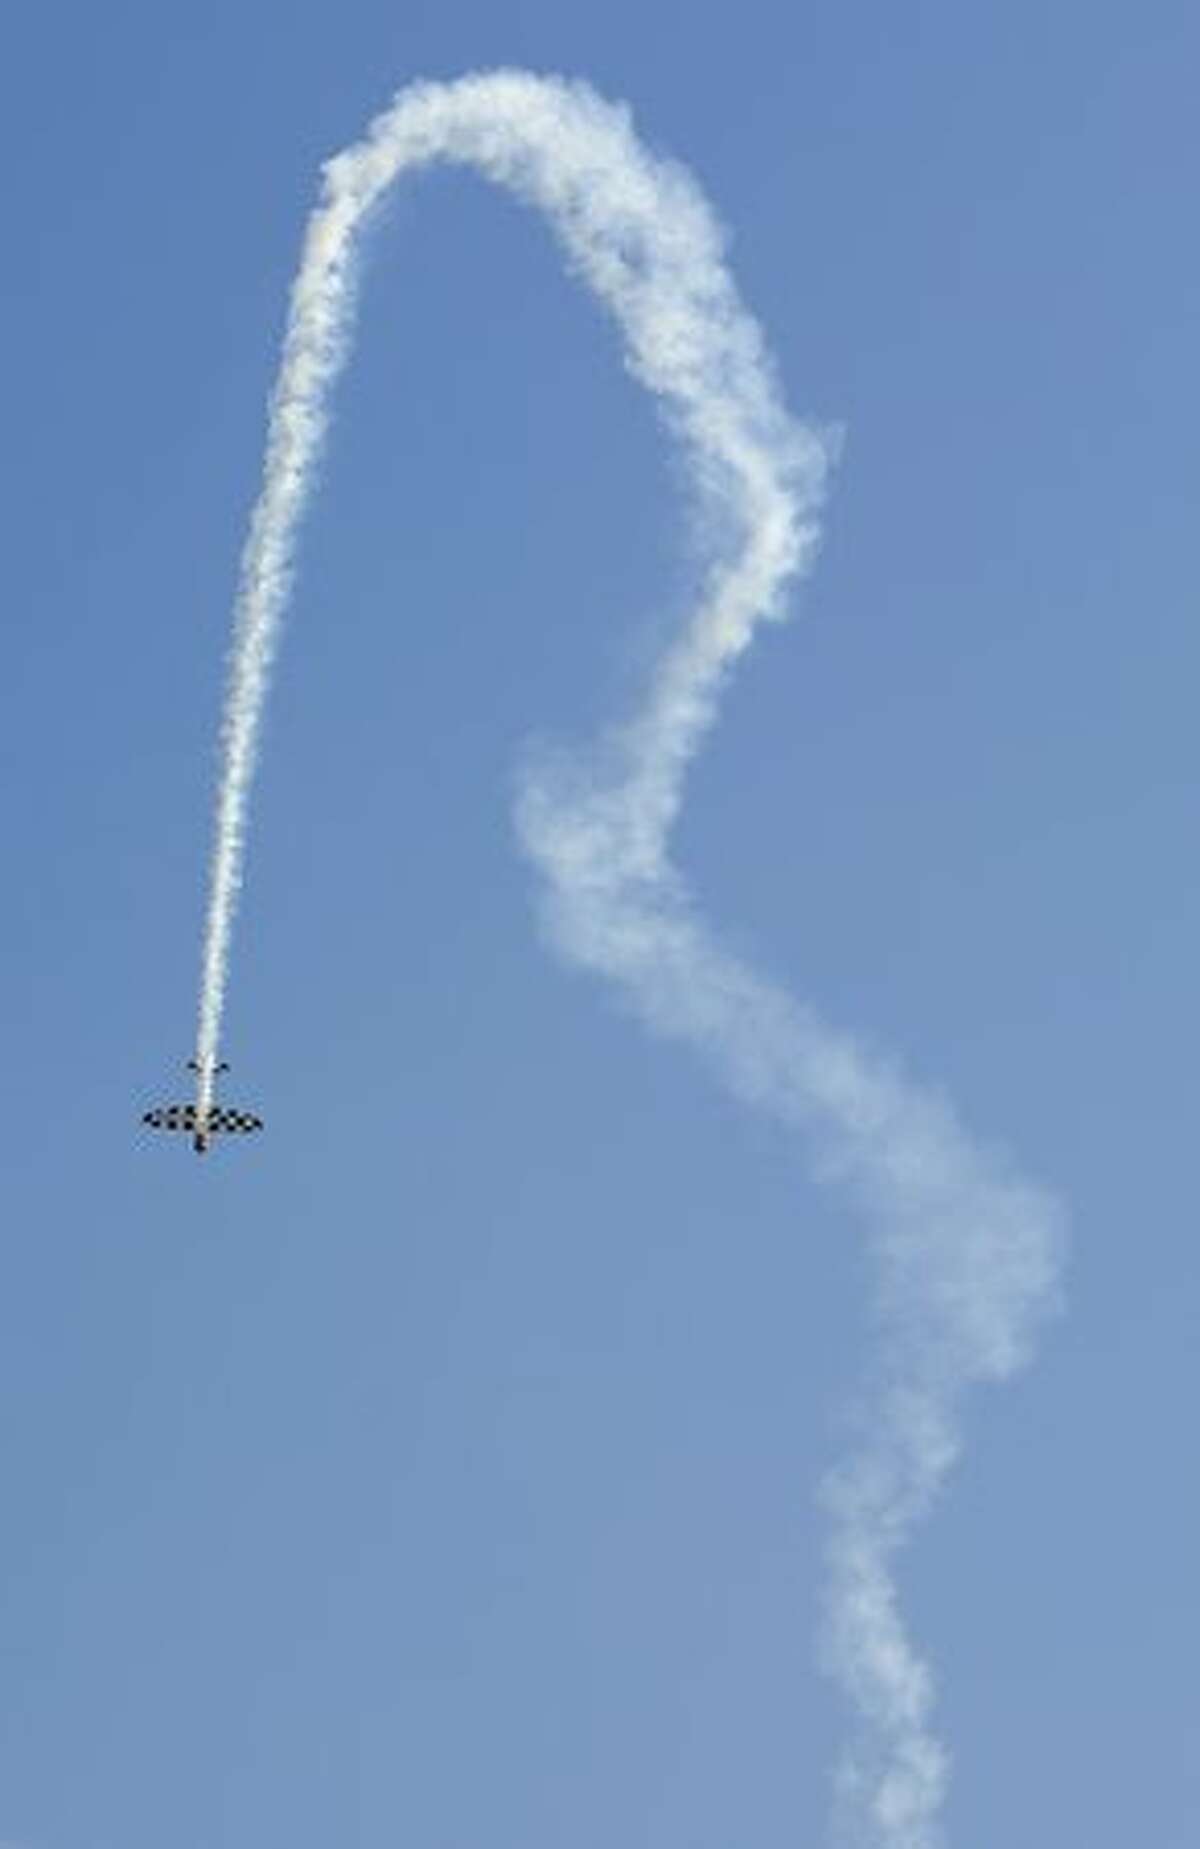 A plane performs aerobatics during the "The Party of Heaven" air show 2010" in Barcelona.